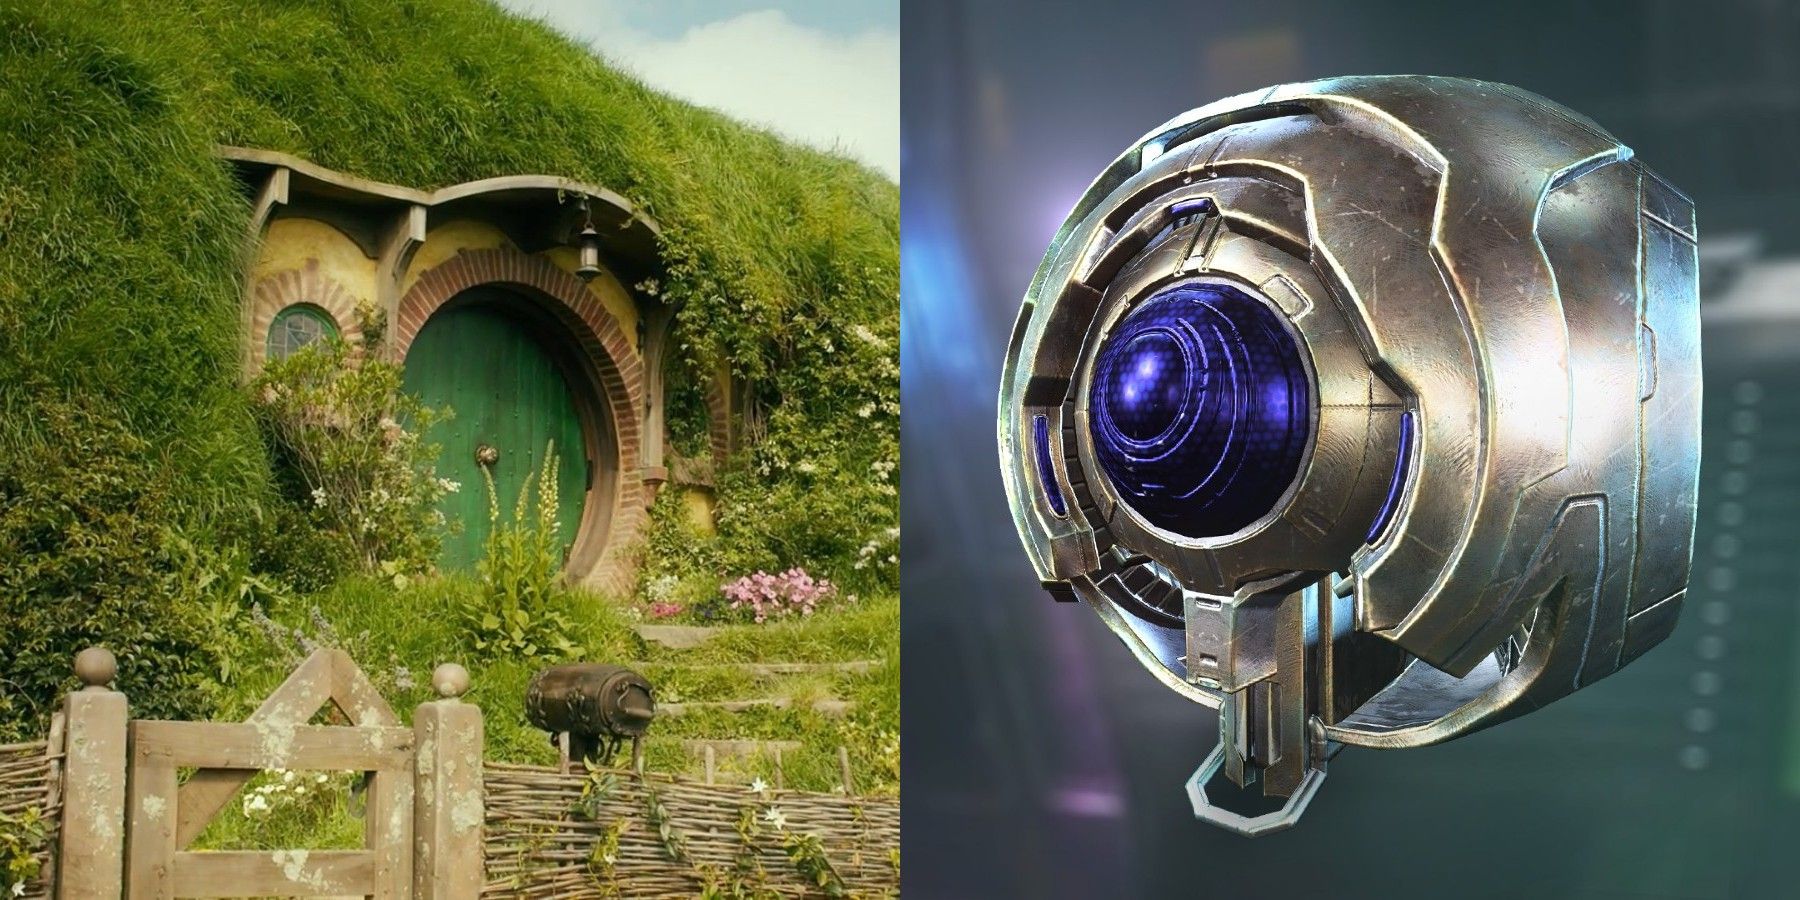 Halo Infinite Player’s Middle-earth Shows Forge Mode’s Creative Potential